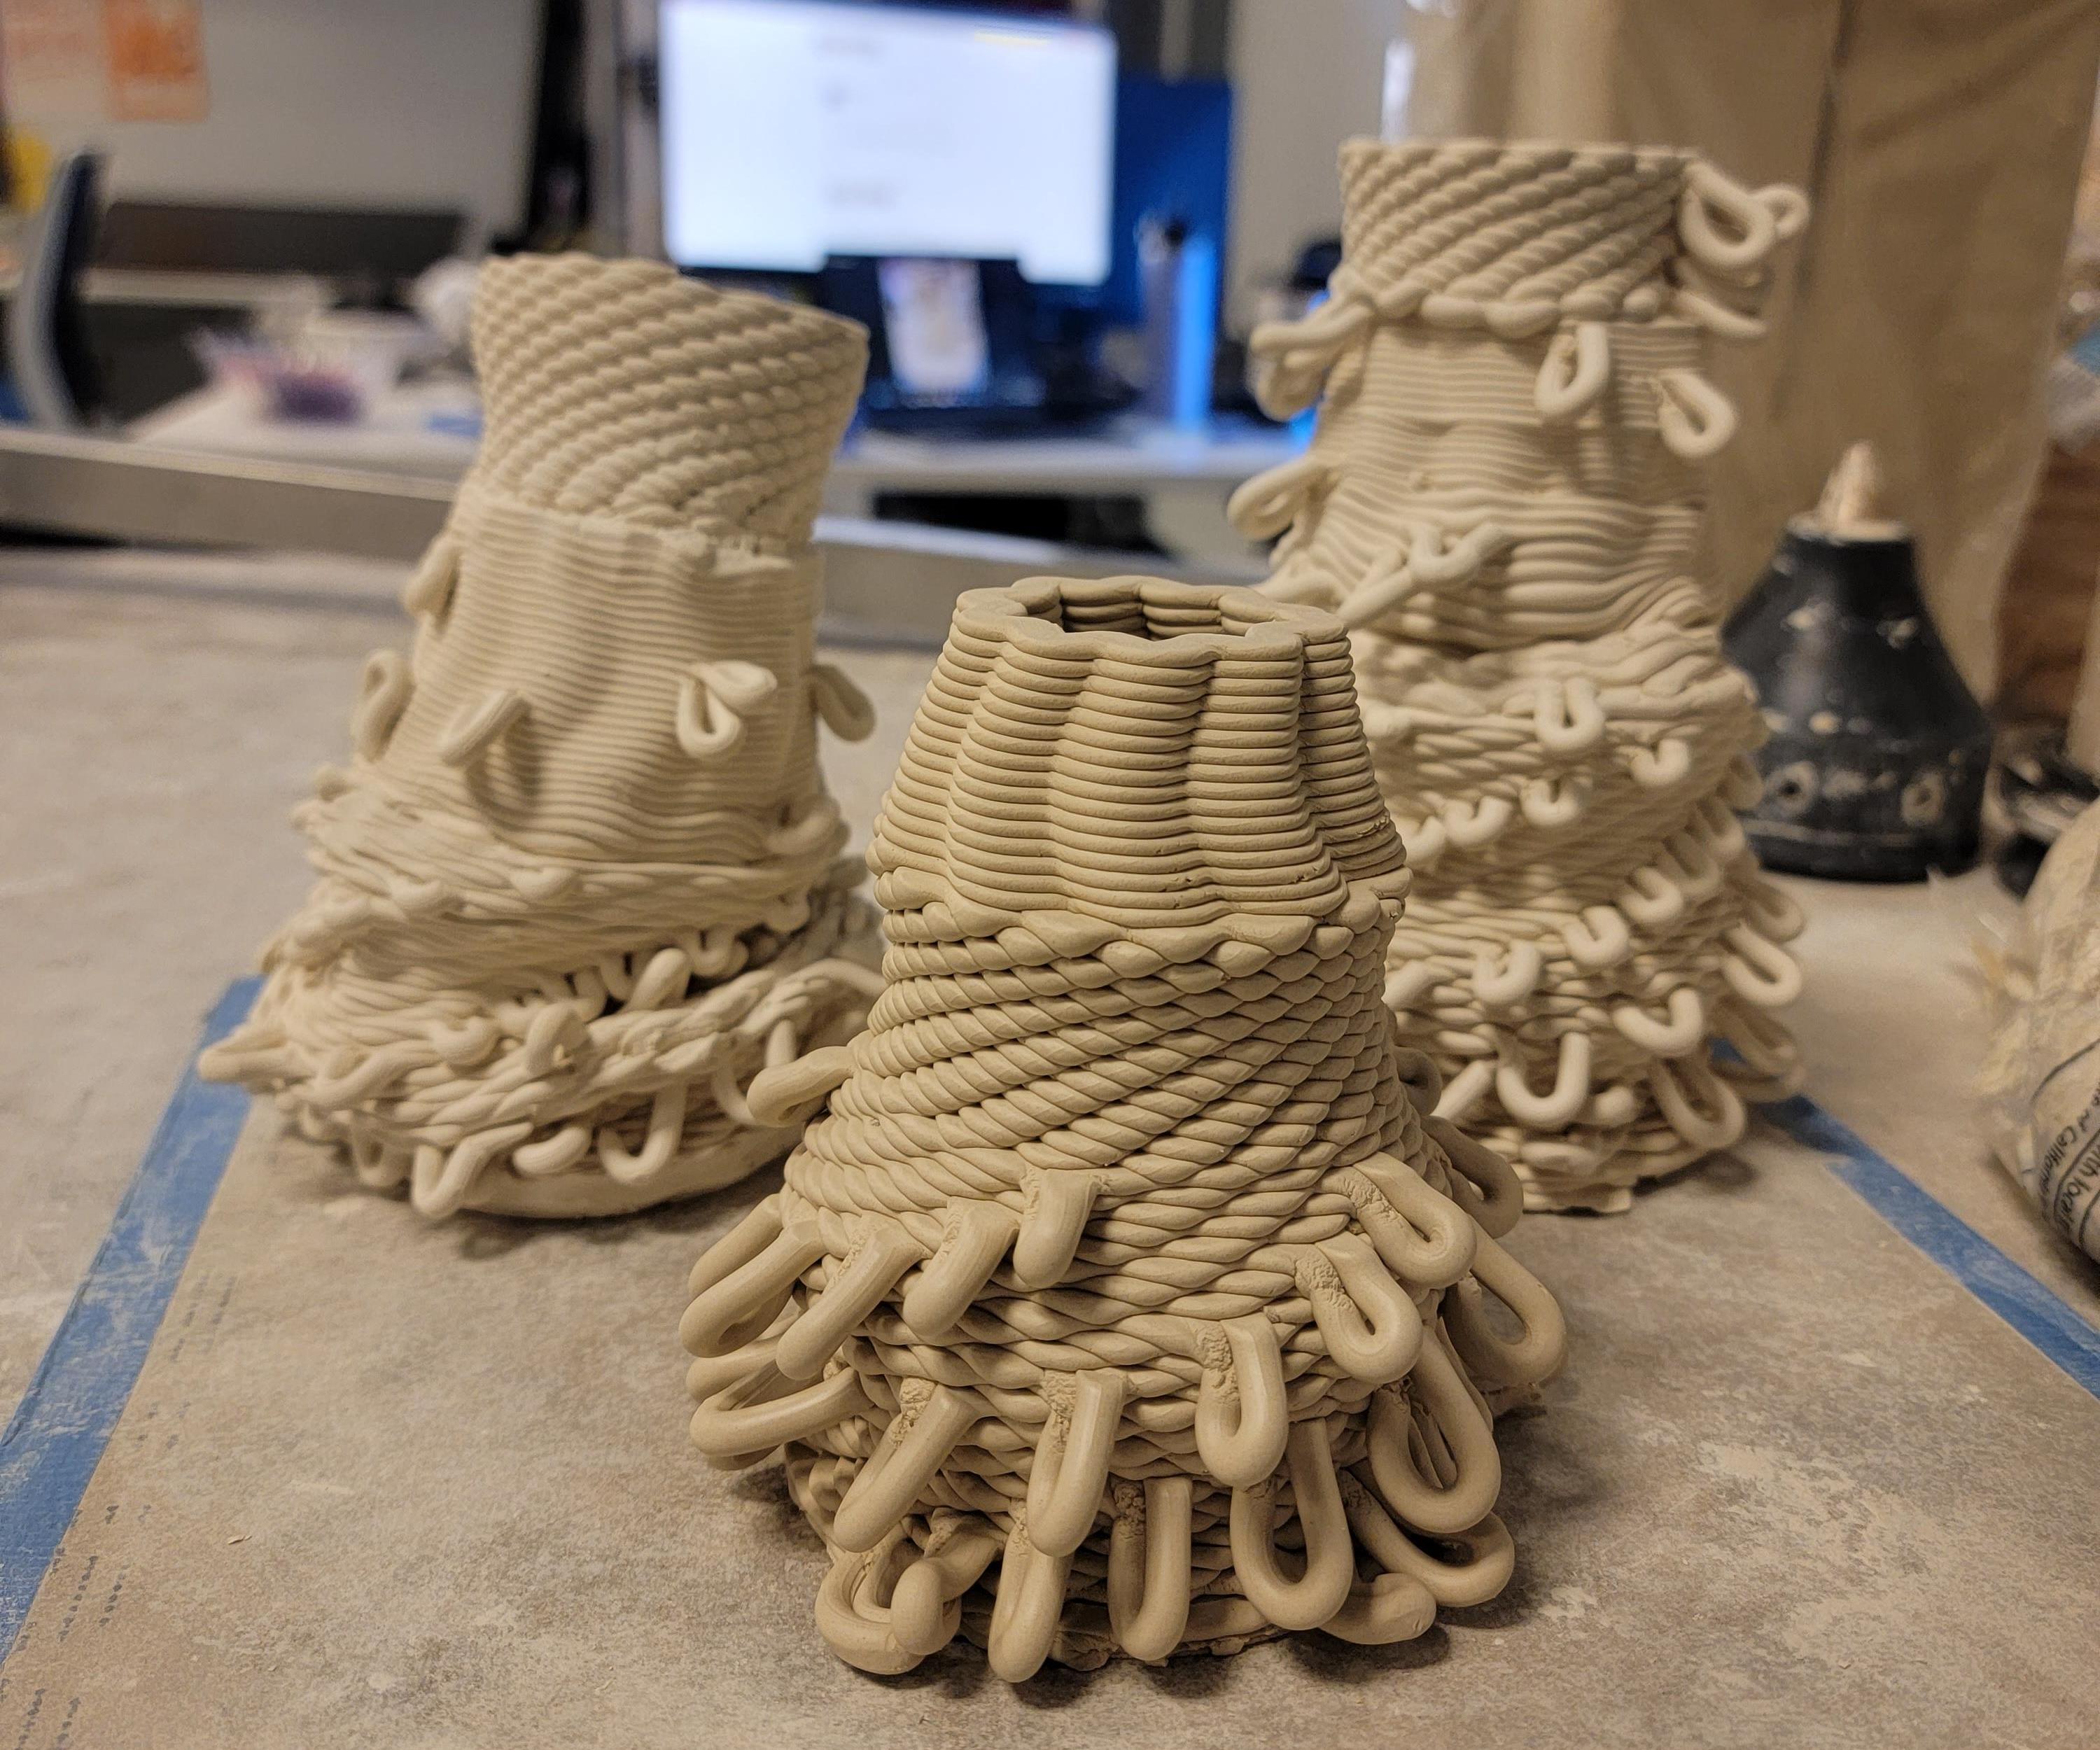 Clay 3D Printing in Whoville